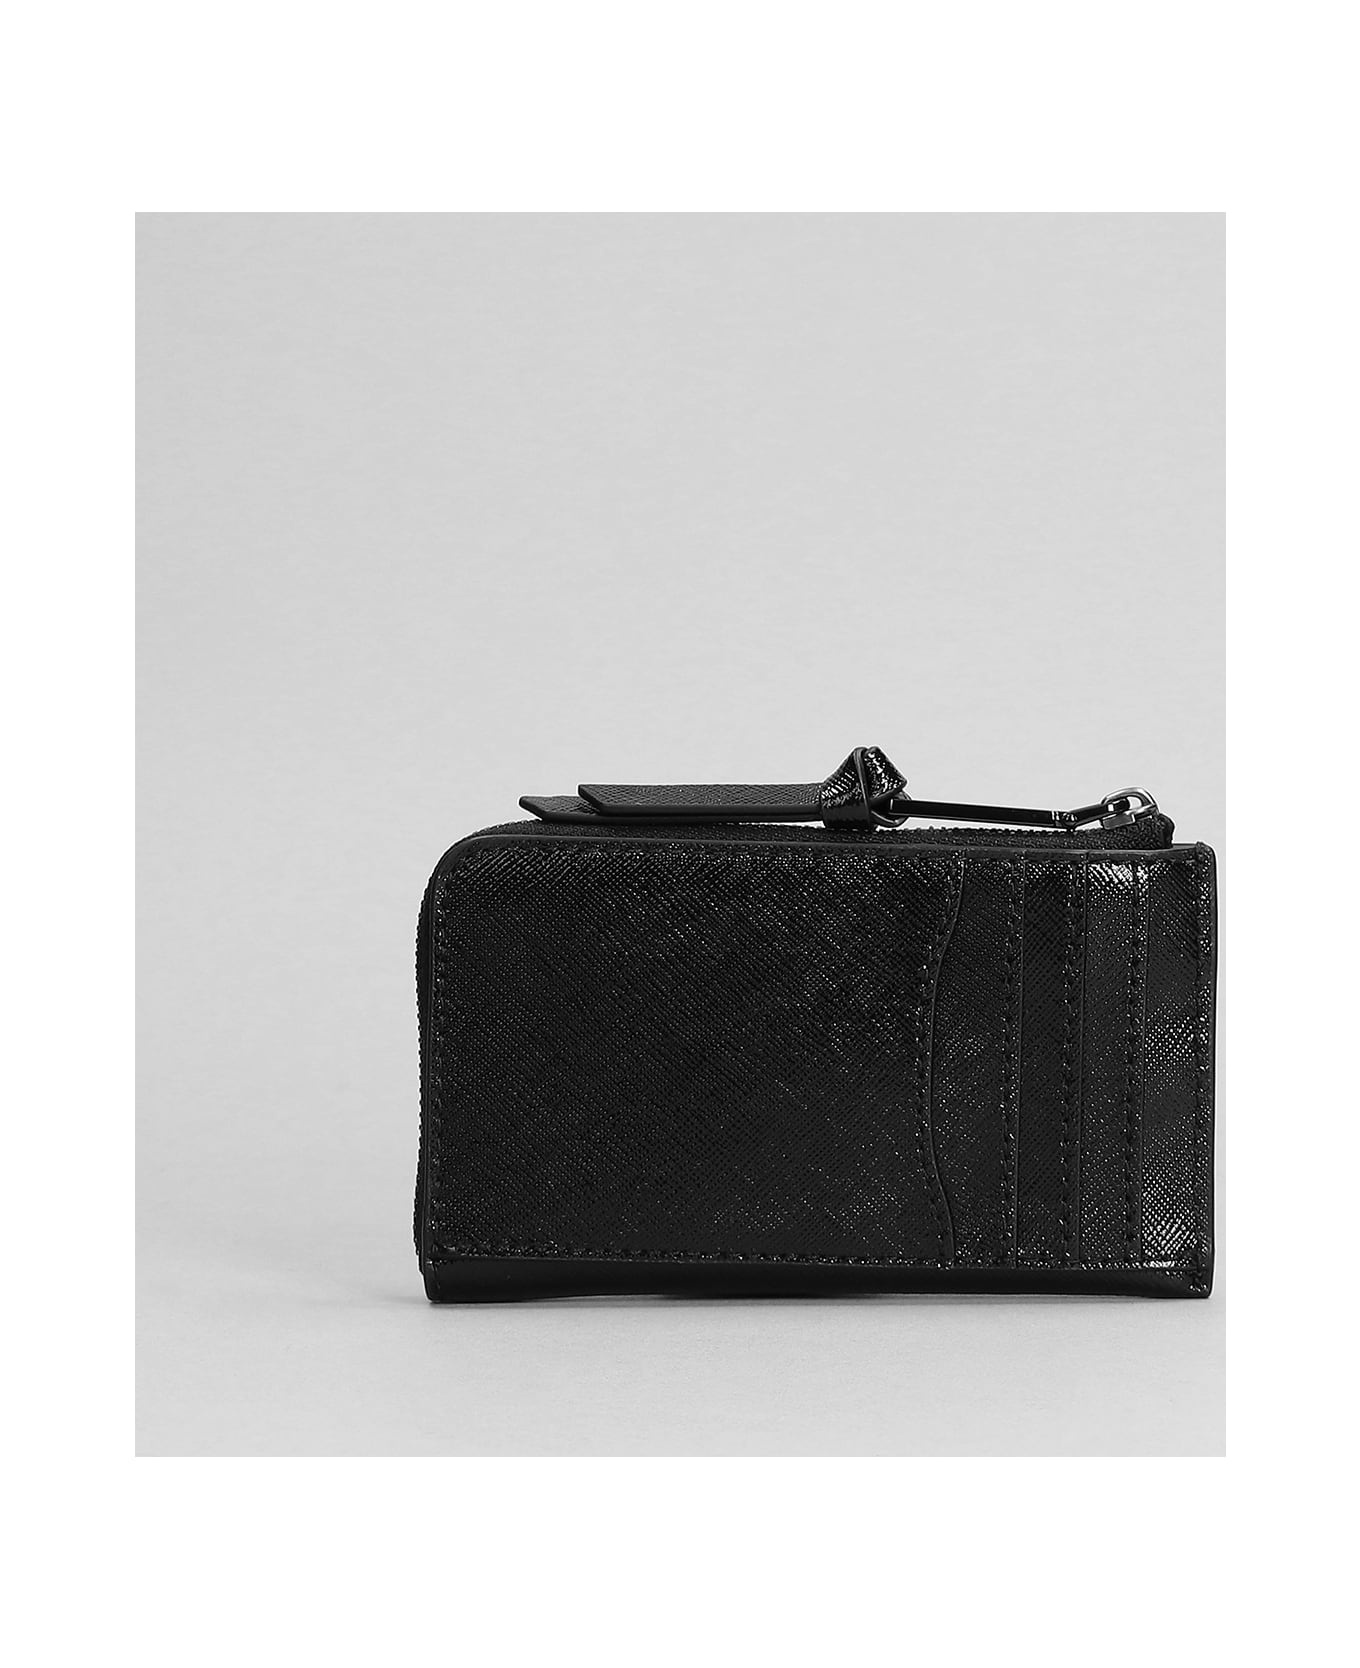 Marc Jacobs The Top Zip Multi Wallet In Black Leather - NERO 財布